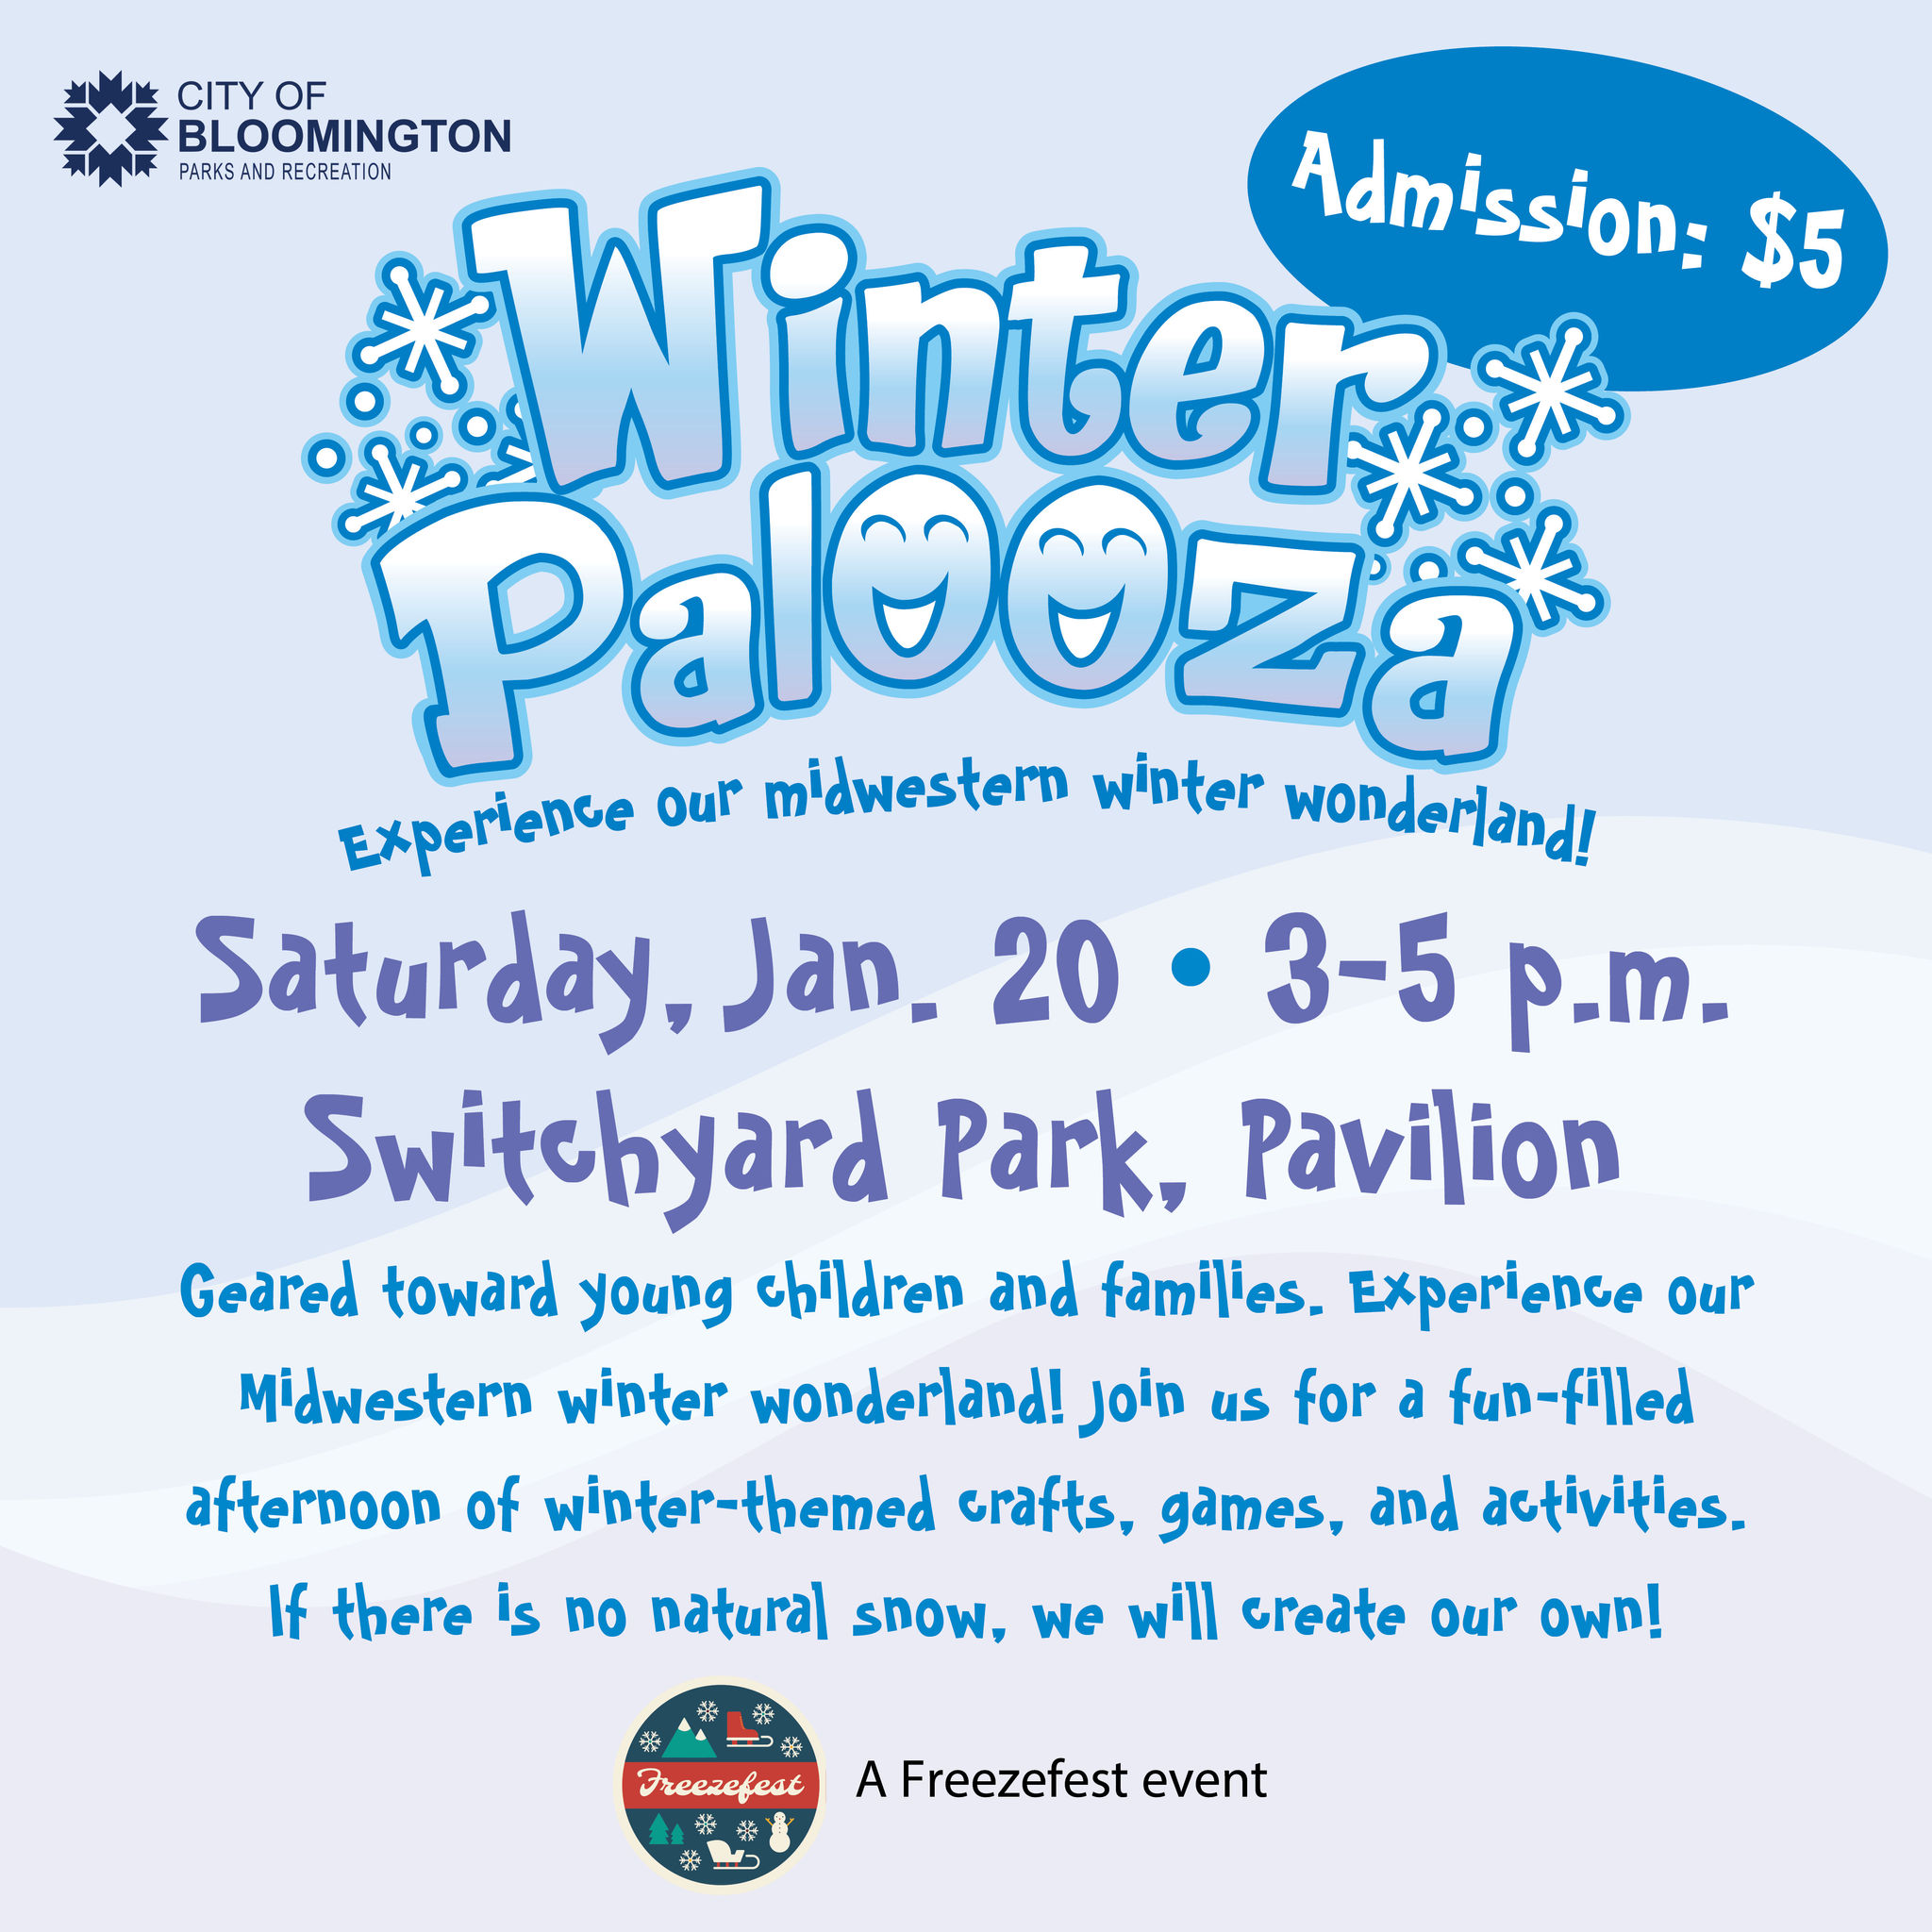 Winter Palooza, a Midwestern Winter Wonderland Experience. Saturday, January 20, 2 - 5 p.m. at Switchyard Park Pavilion. This event is geared toward children and families with winter-themed activities